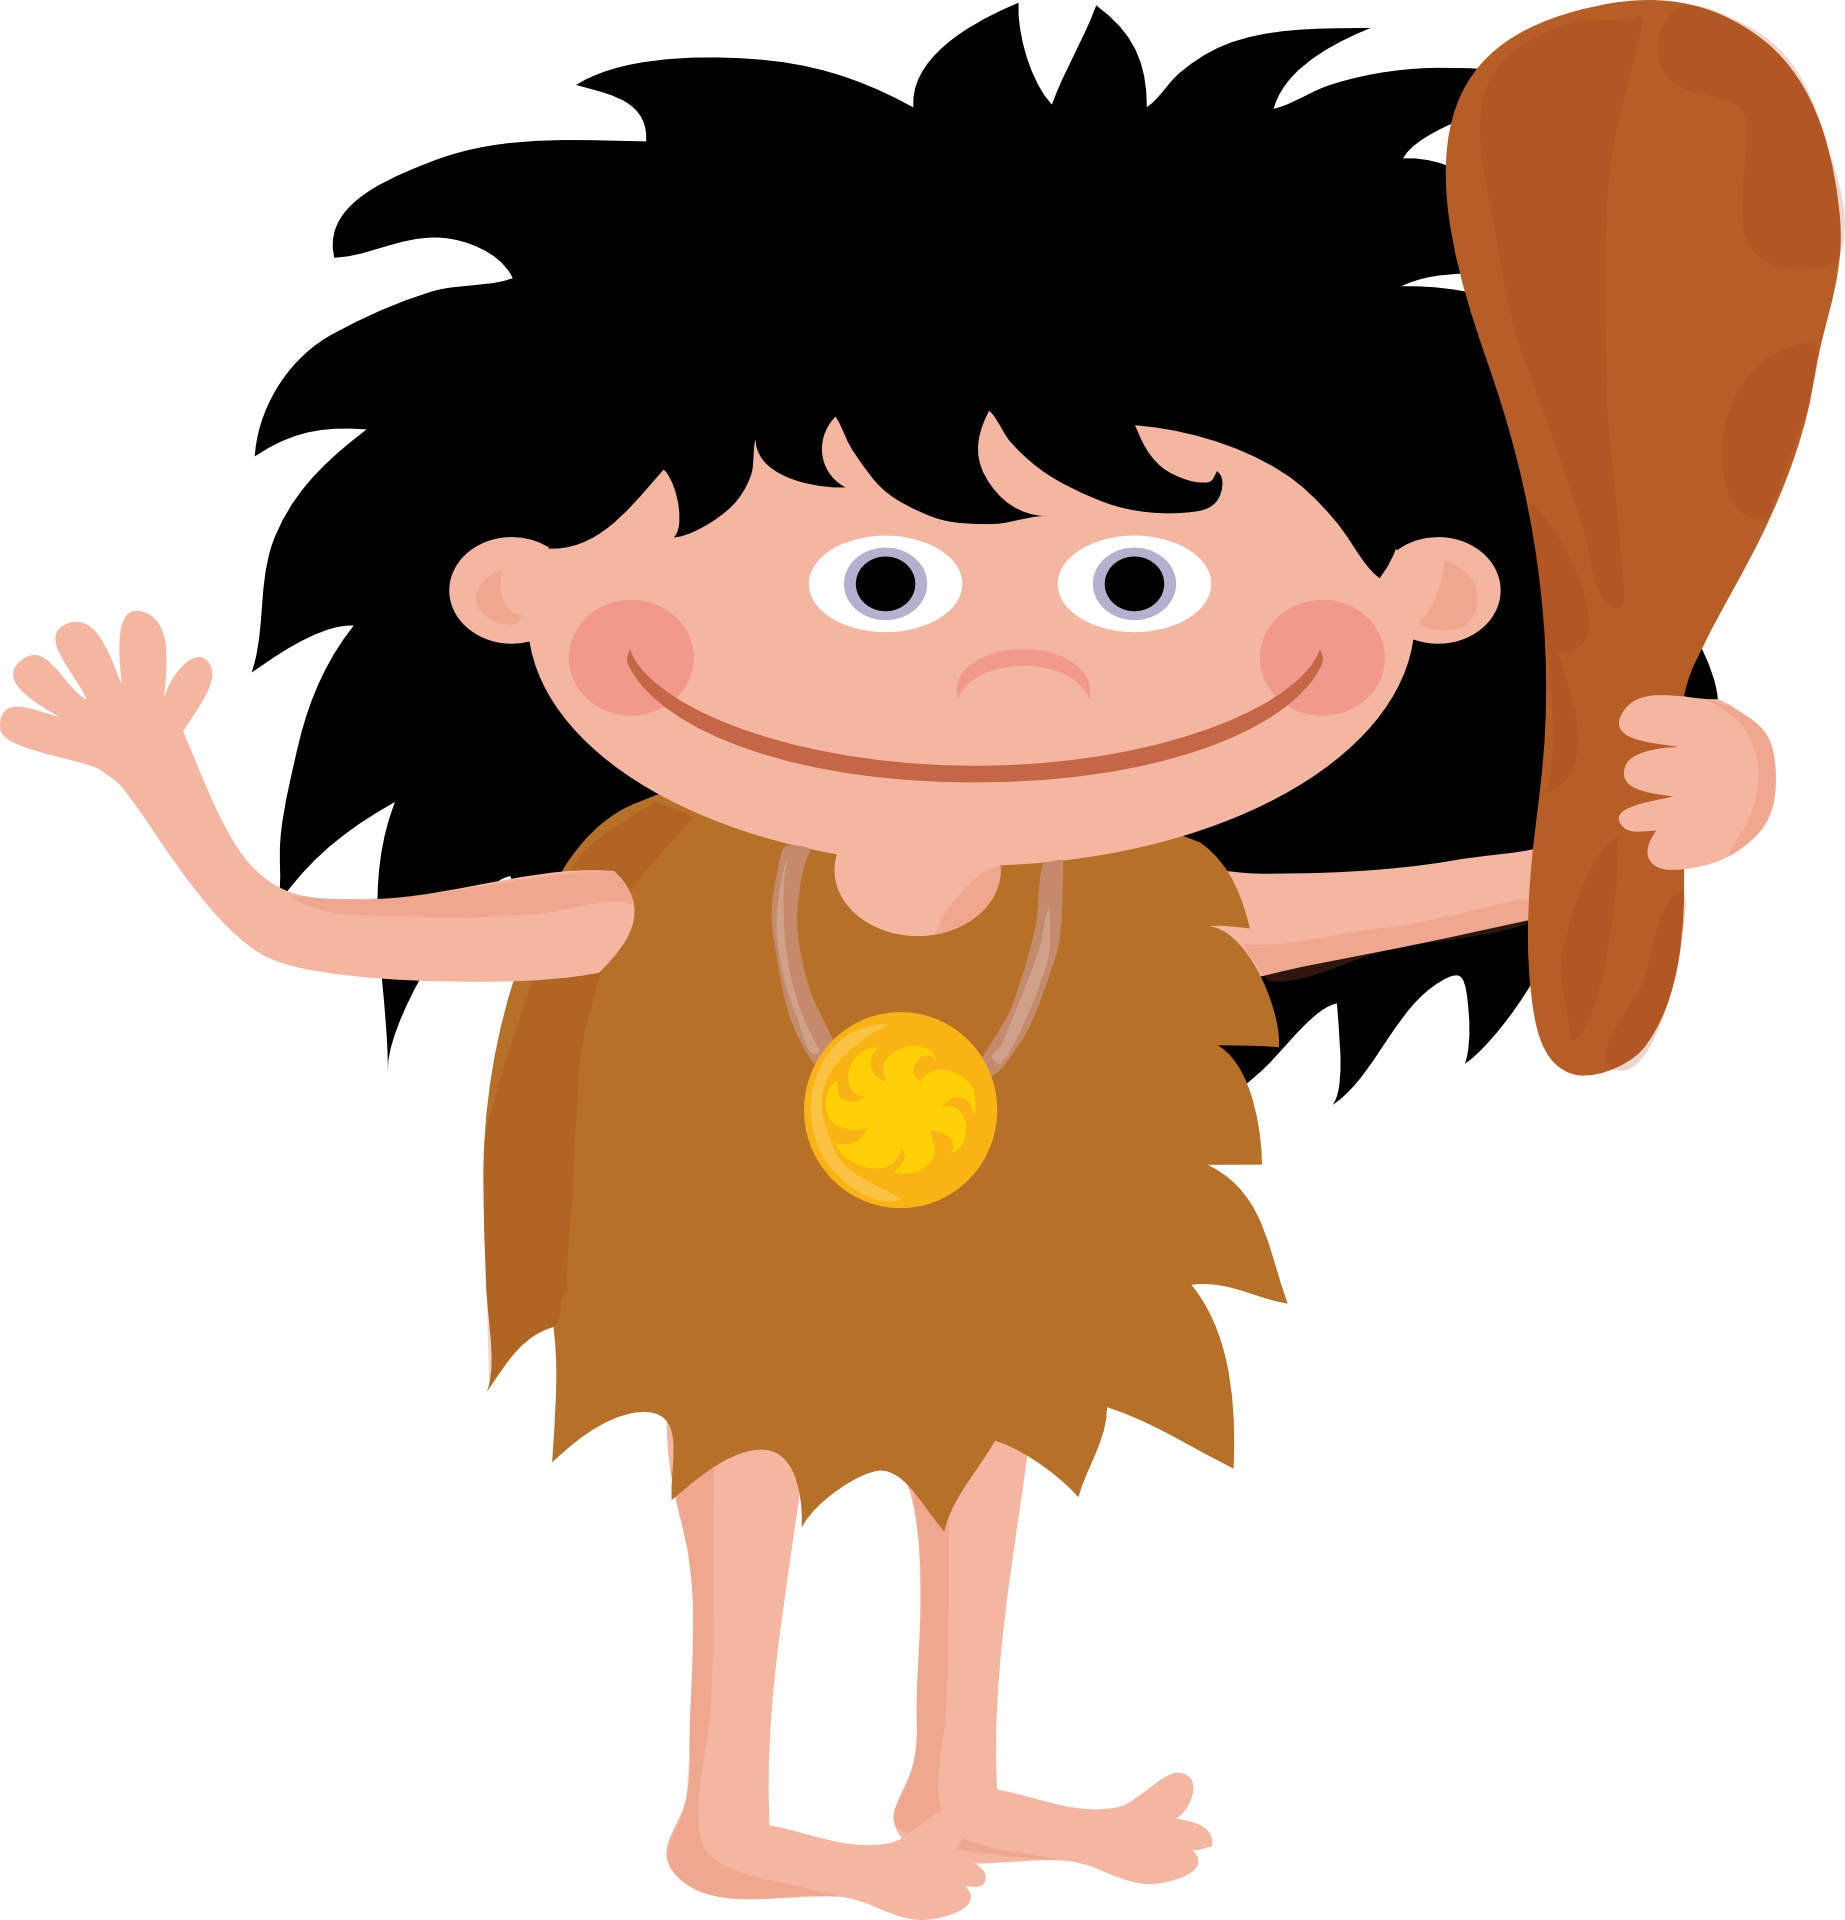 Caveman clipart neolithic era. The paleo diet everything